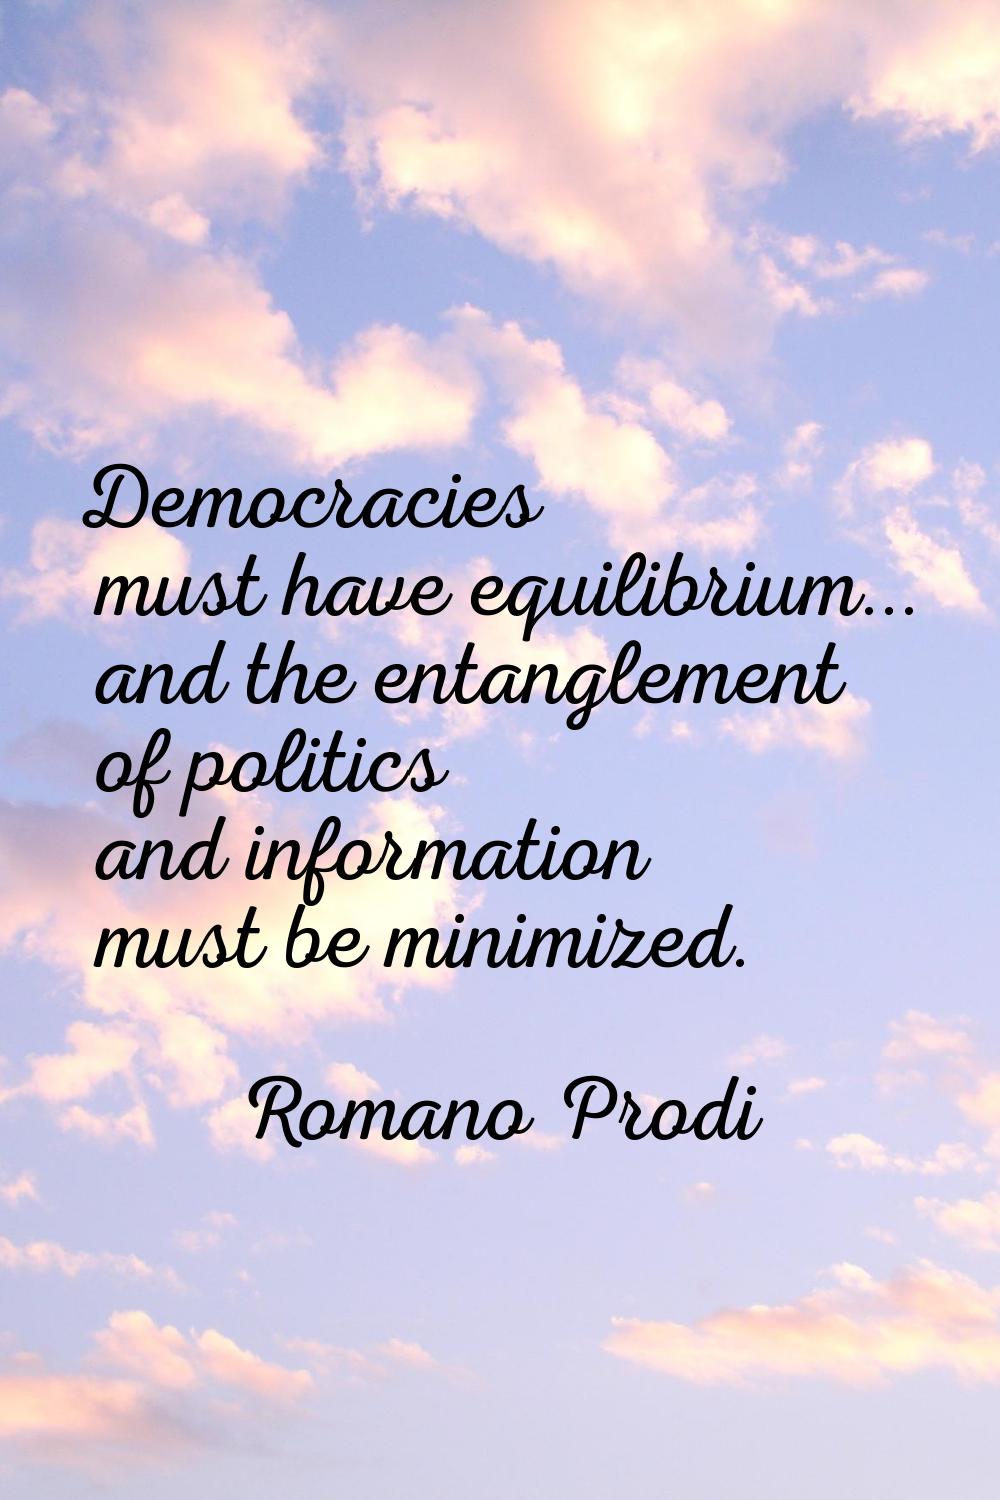 Democracies must have equilibrium... and the entanglement of politics and information must be minim